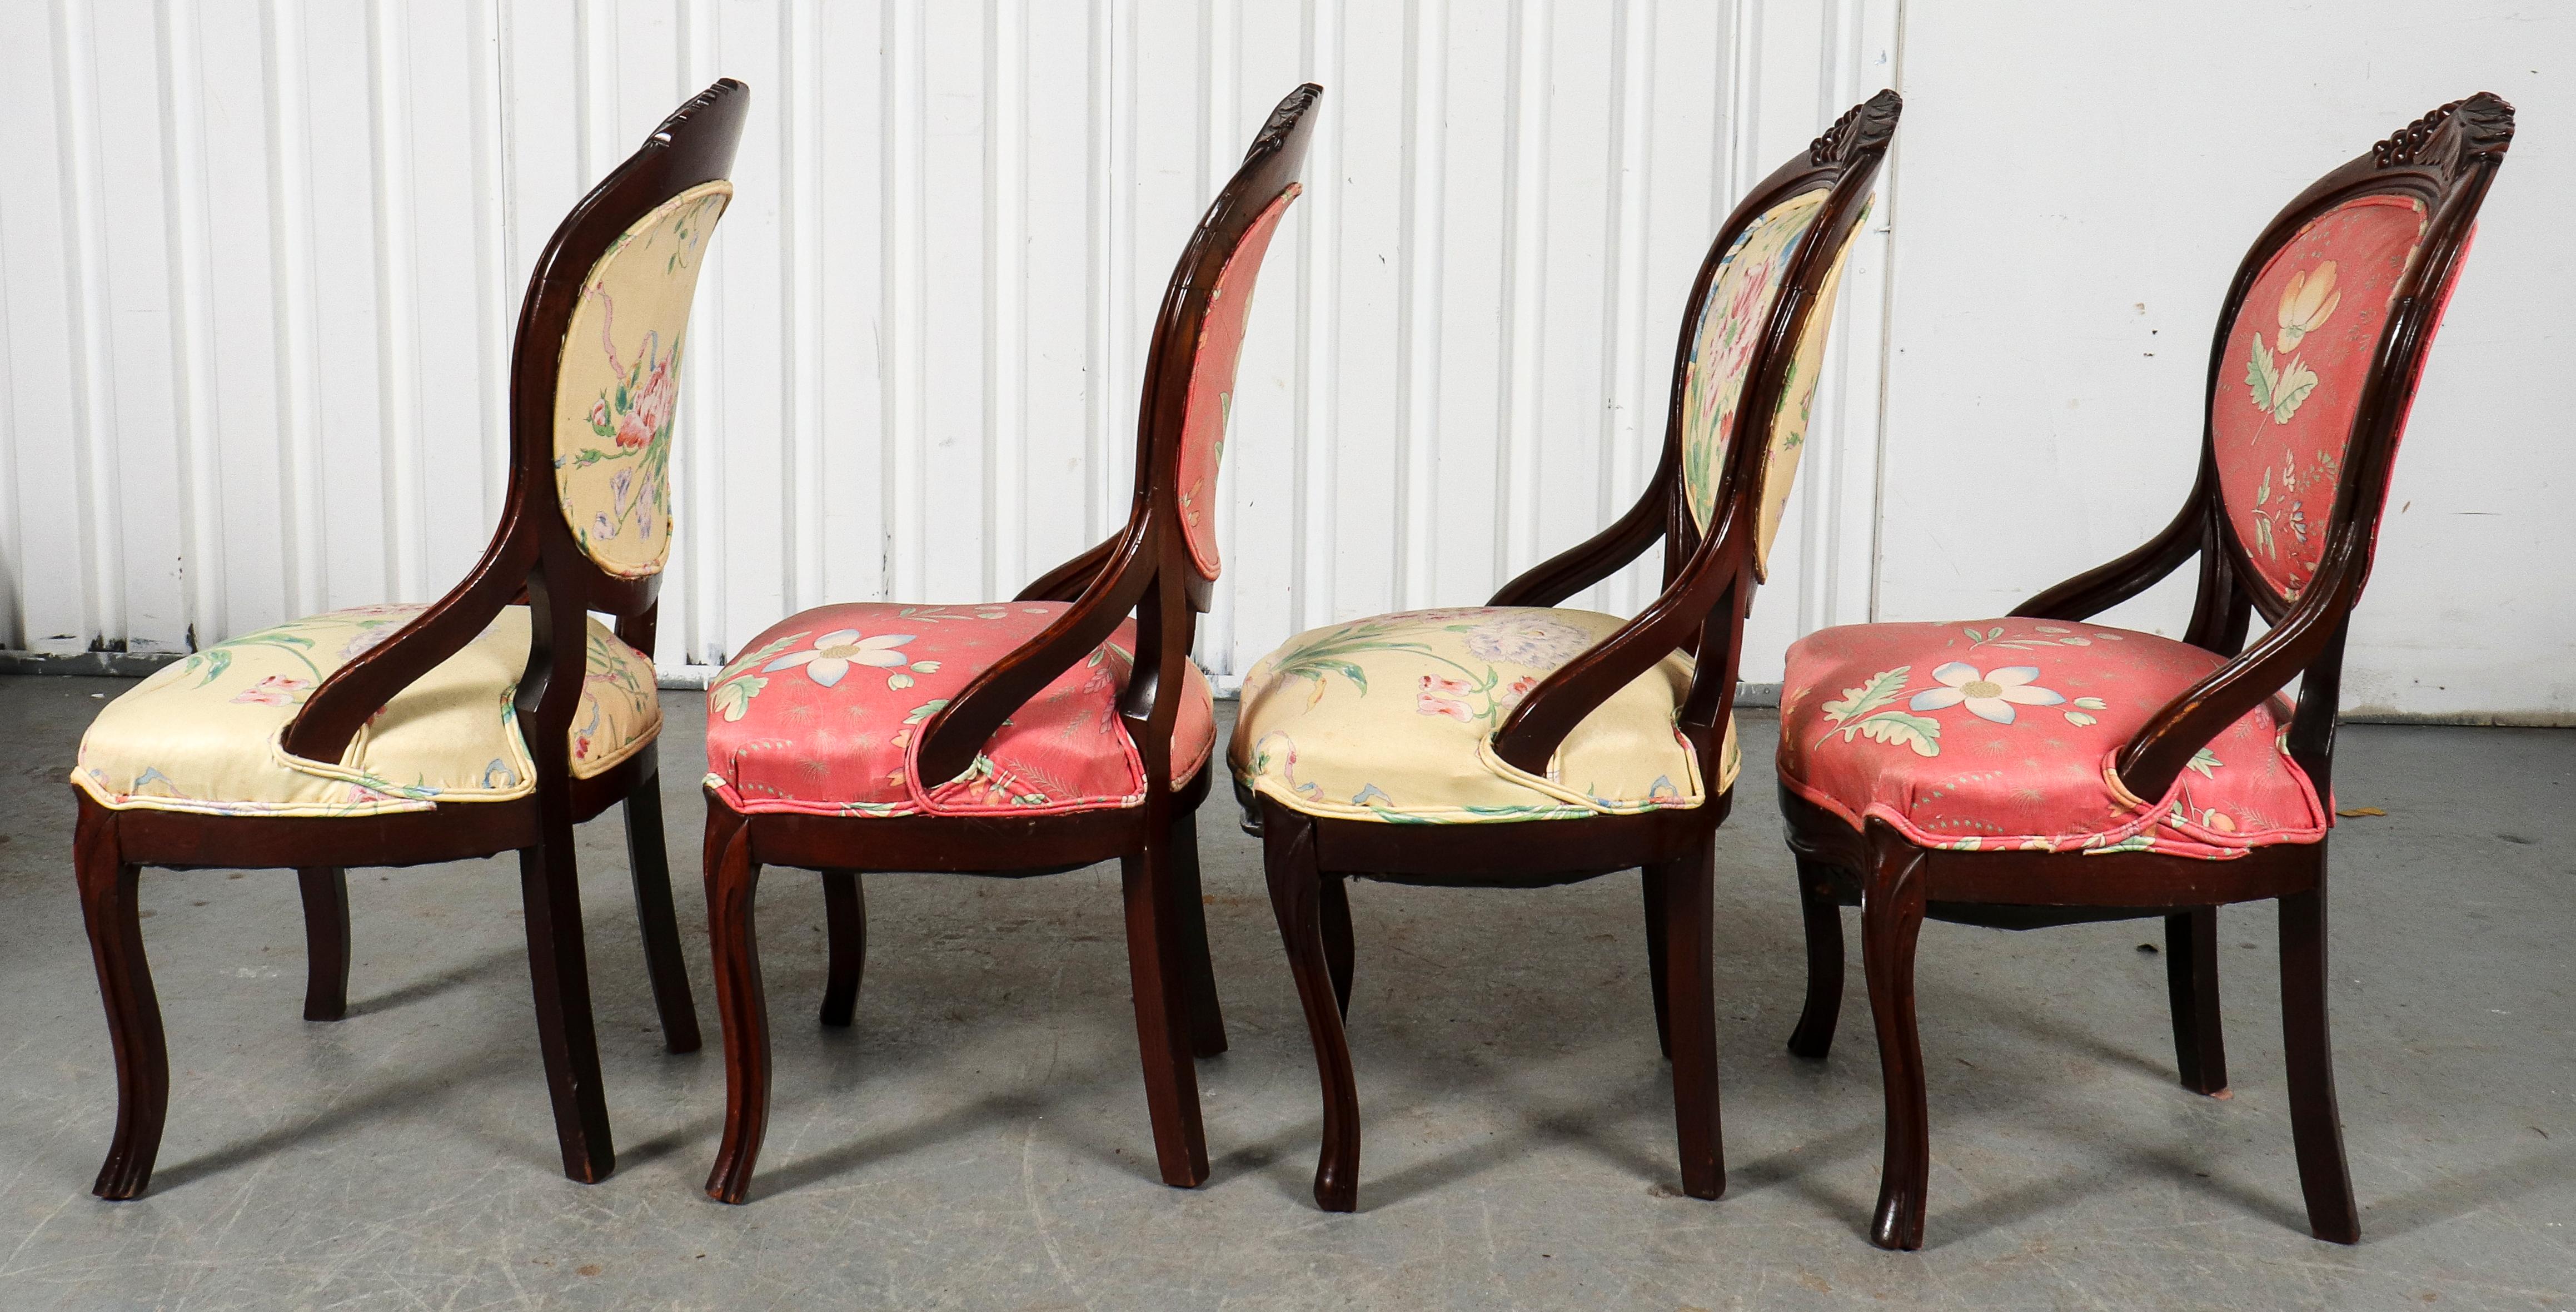 19th Century American Rococo Revival Style Wooden Chairs For Sale